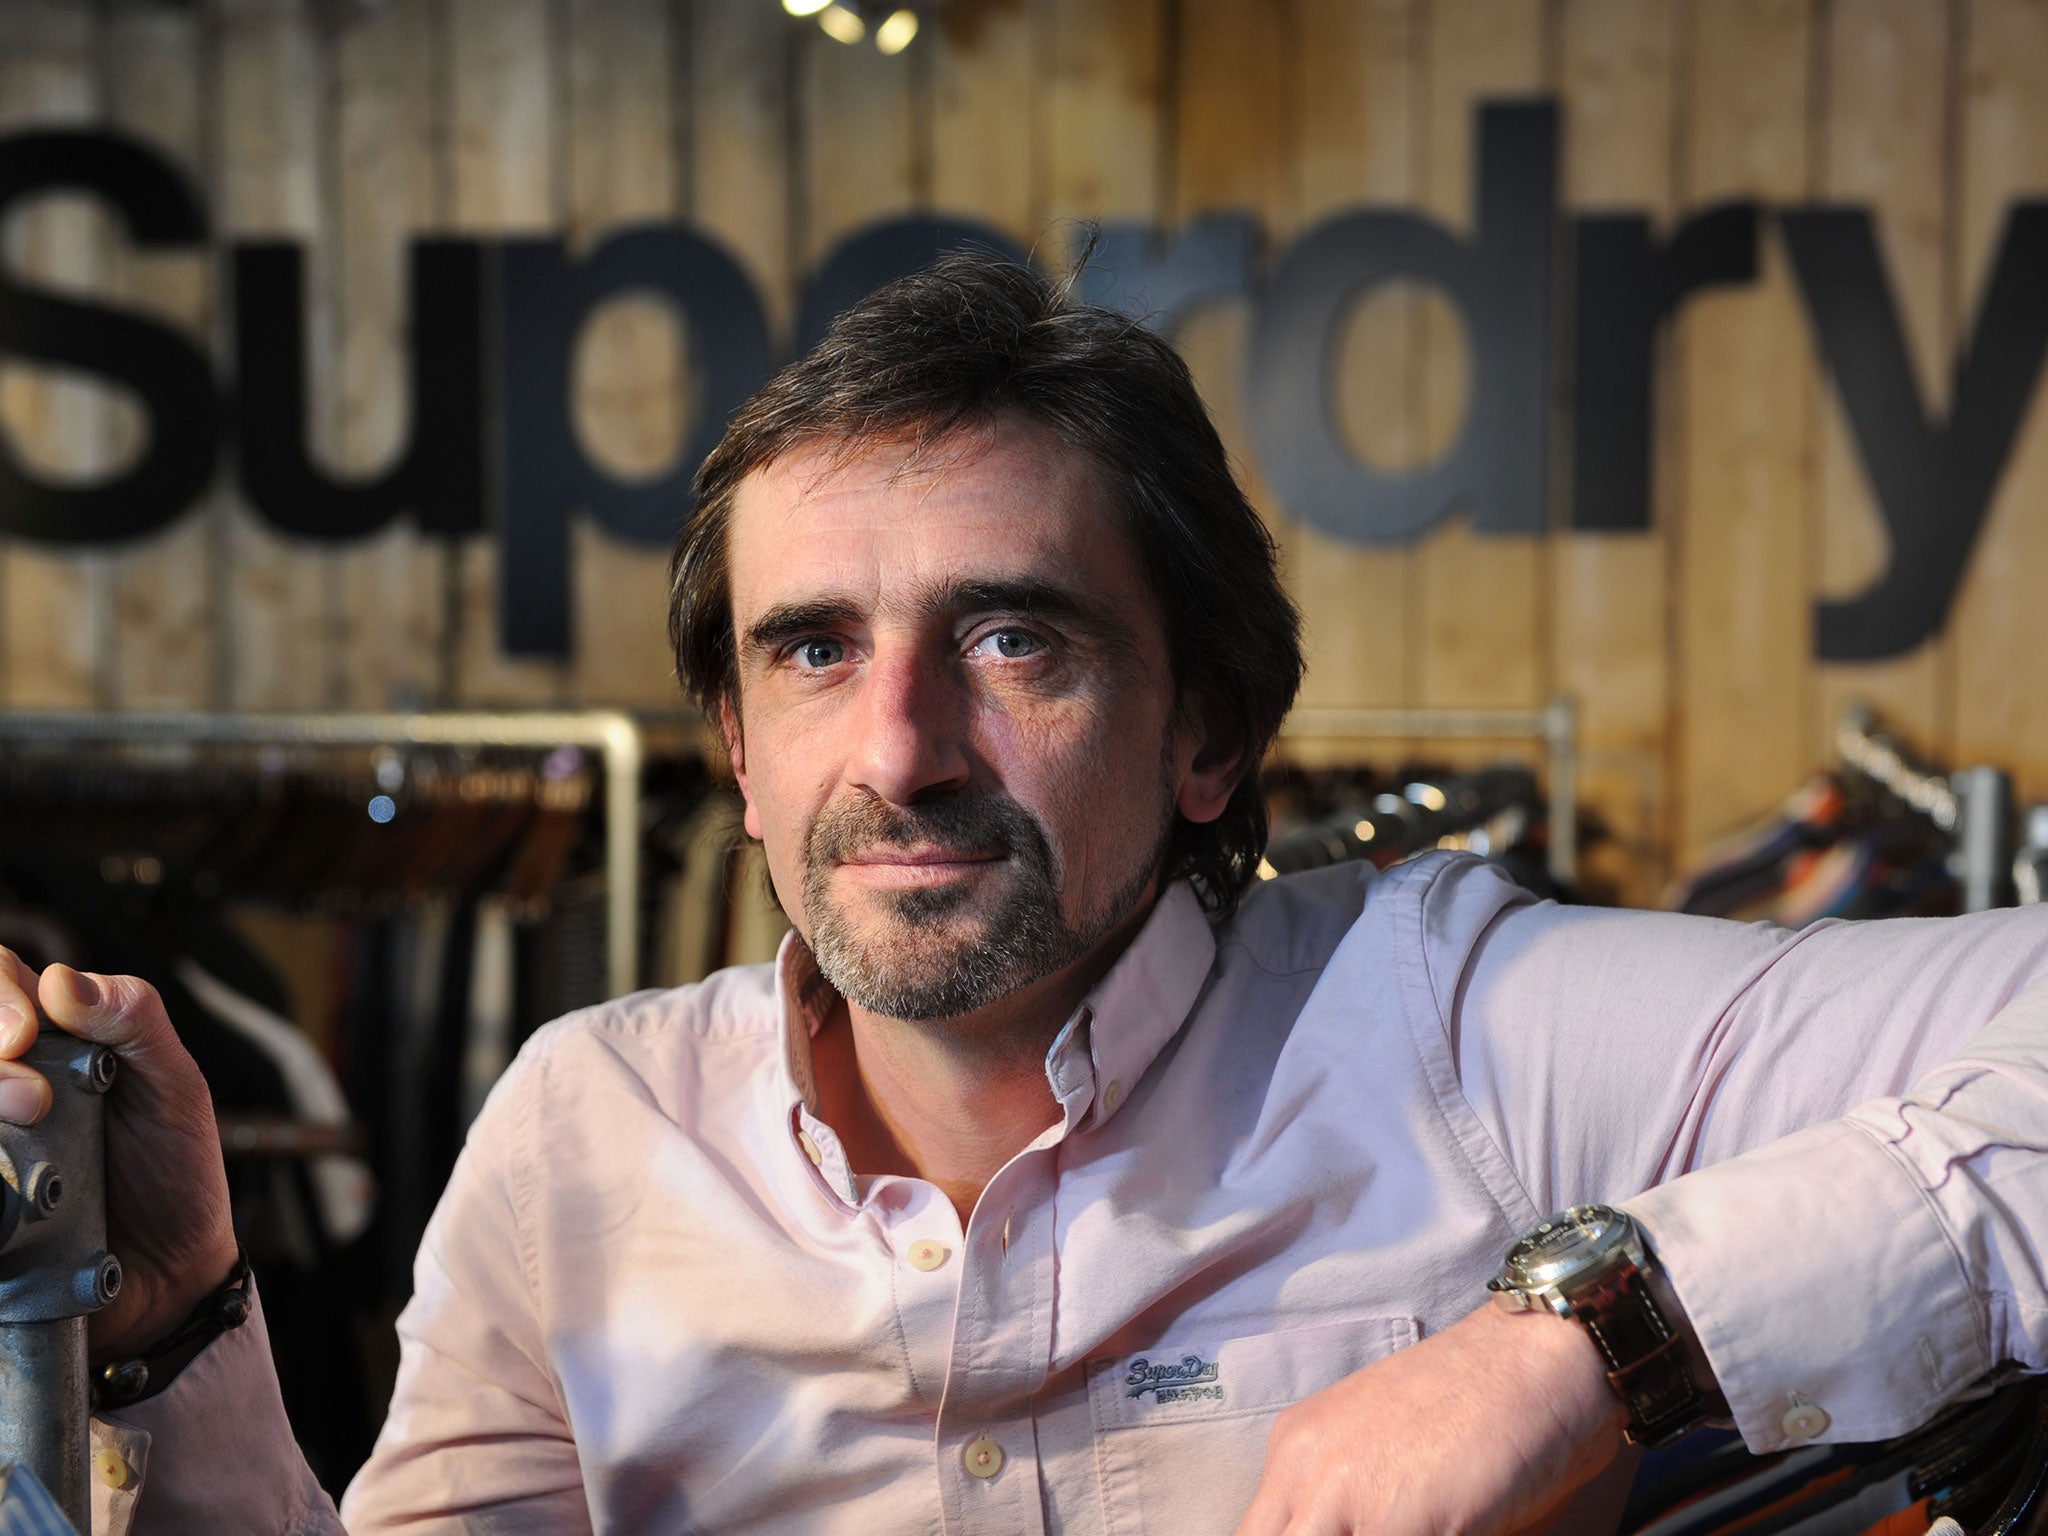 Julian Dunkerton launched the SuperDry label from a market stall in Cheltenham